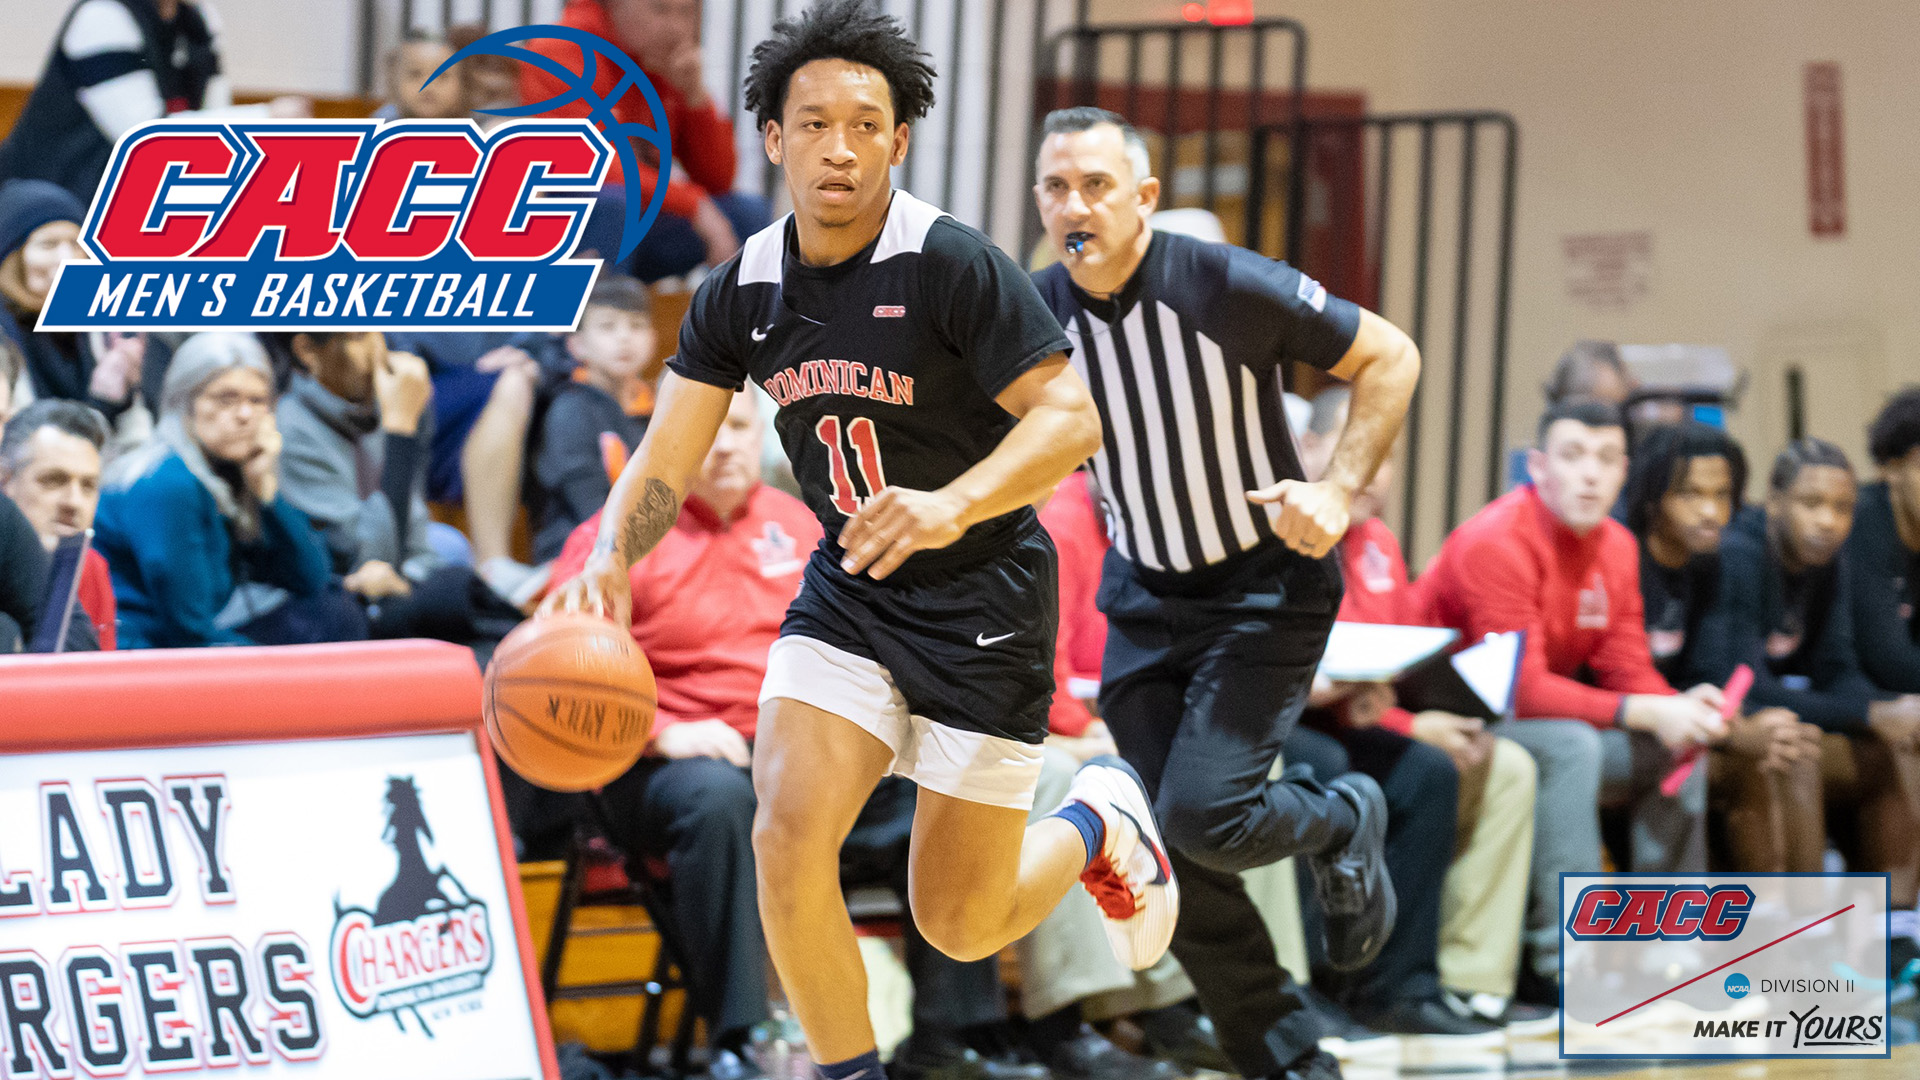 JOHNSON TABBED CACC PLAYER OF THE WEEK